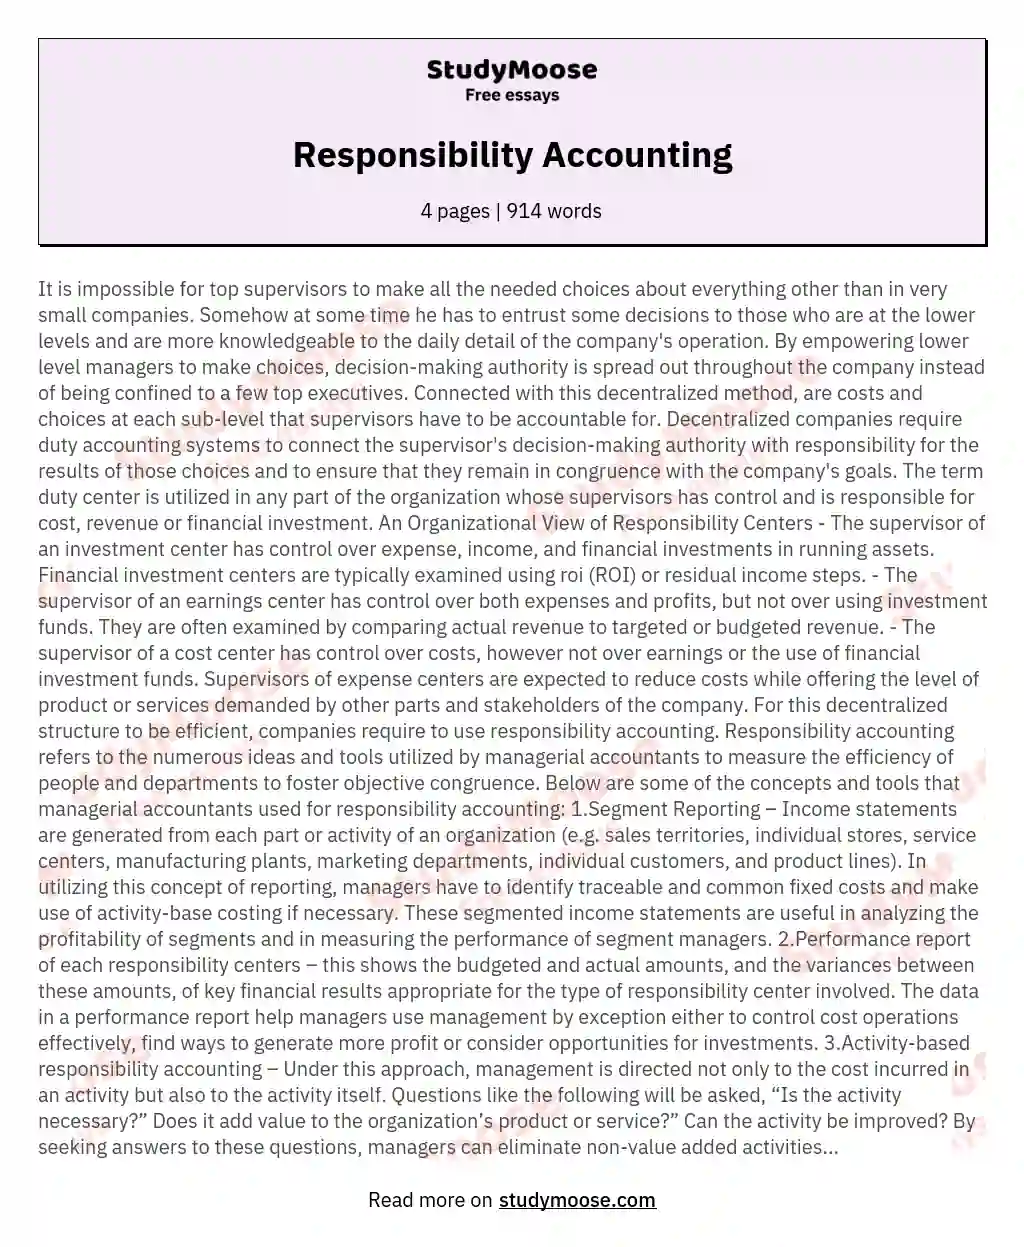 Responsibility Accounting essay